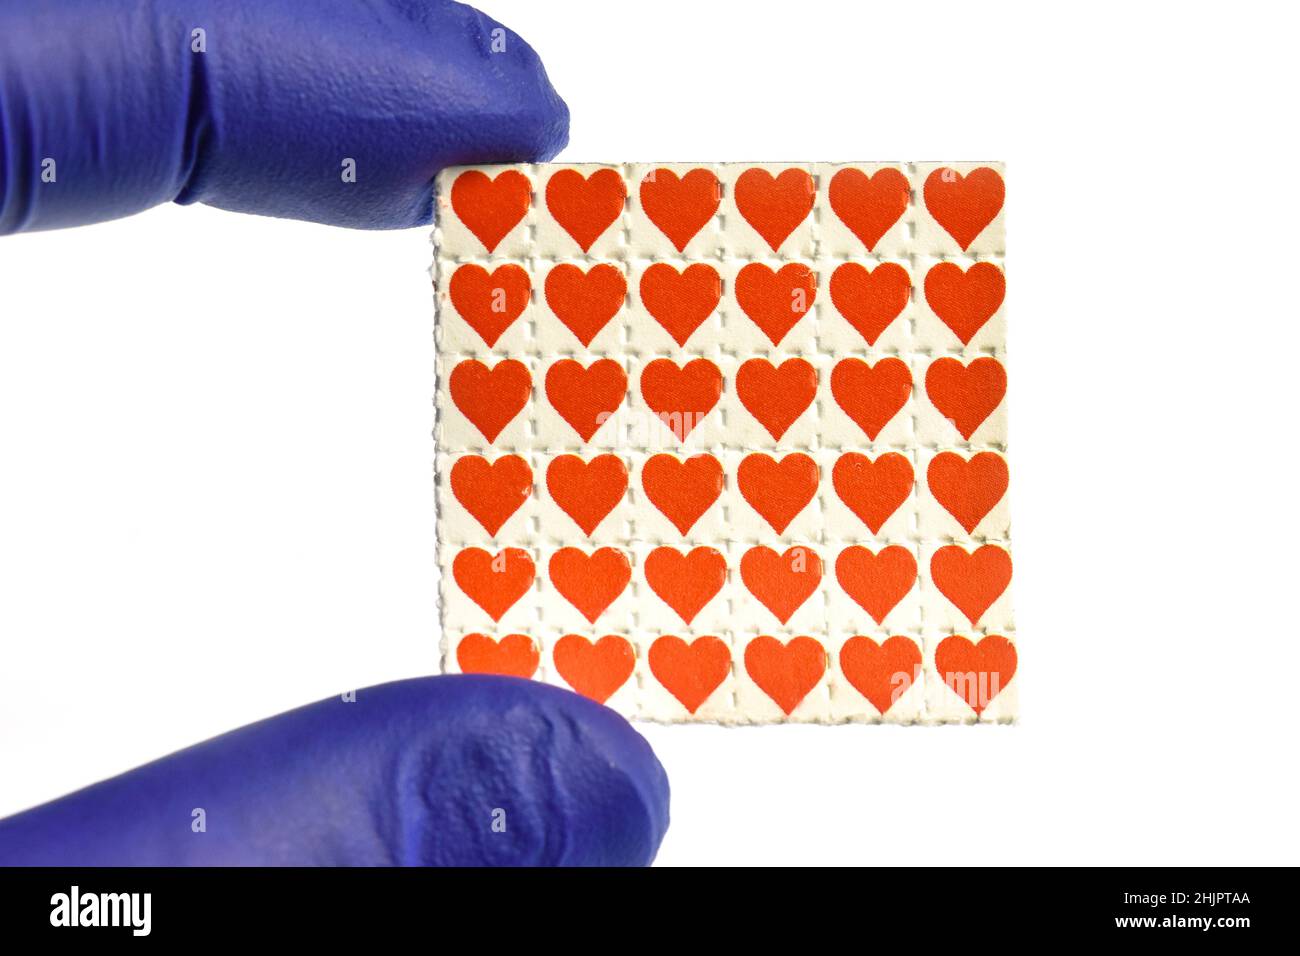 Love hearts acid trips, Blotting paper impregnated with the drug L.S.D.- Lysergic acid diethylamide. Stock Photo